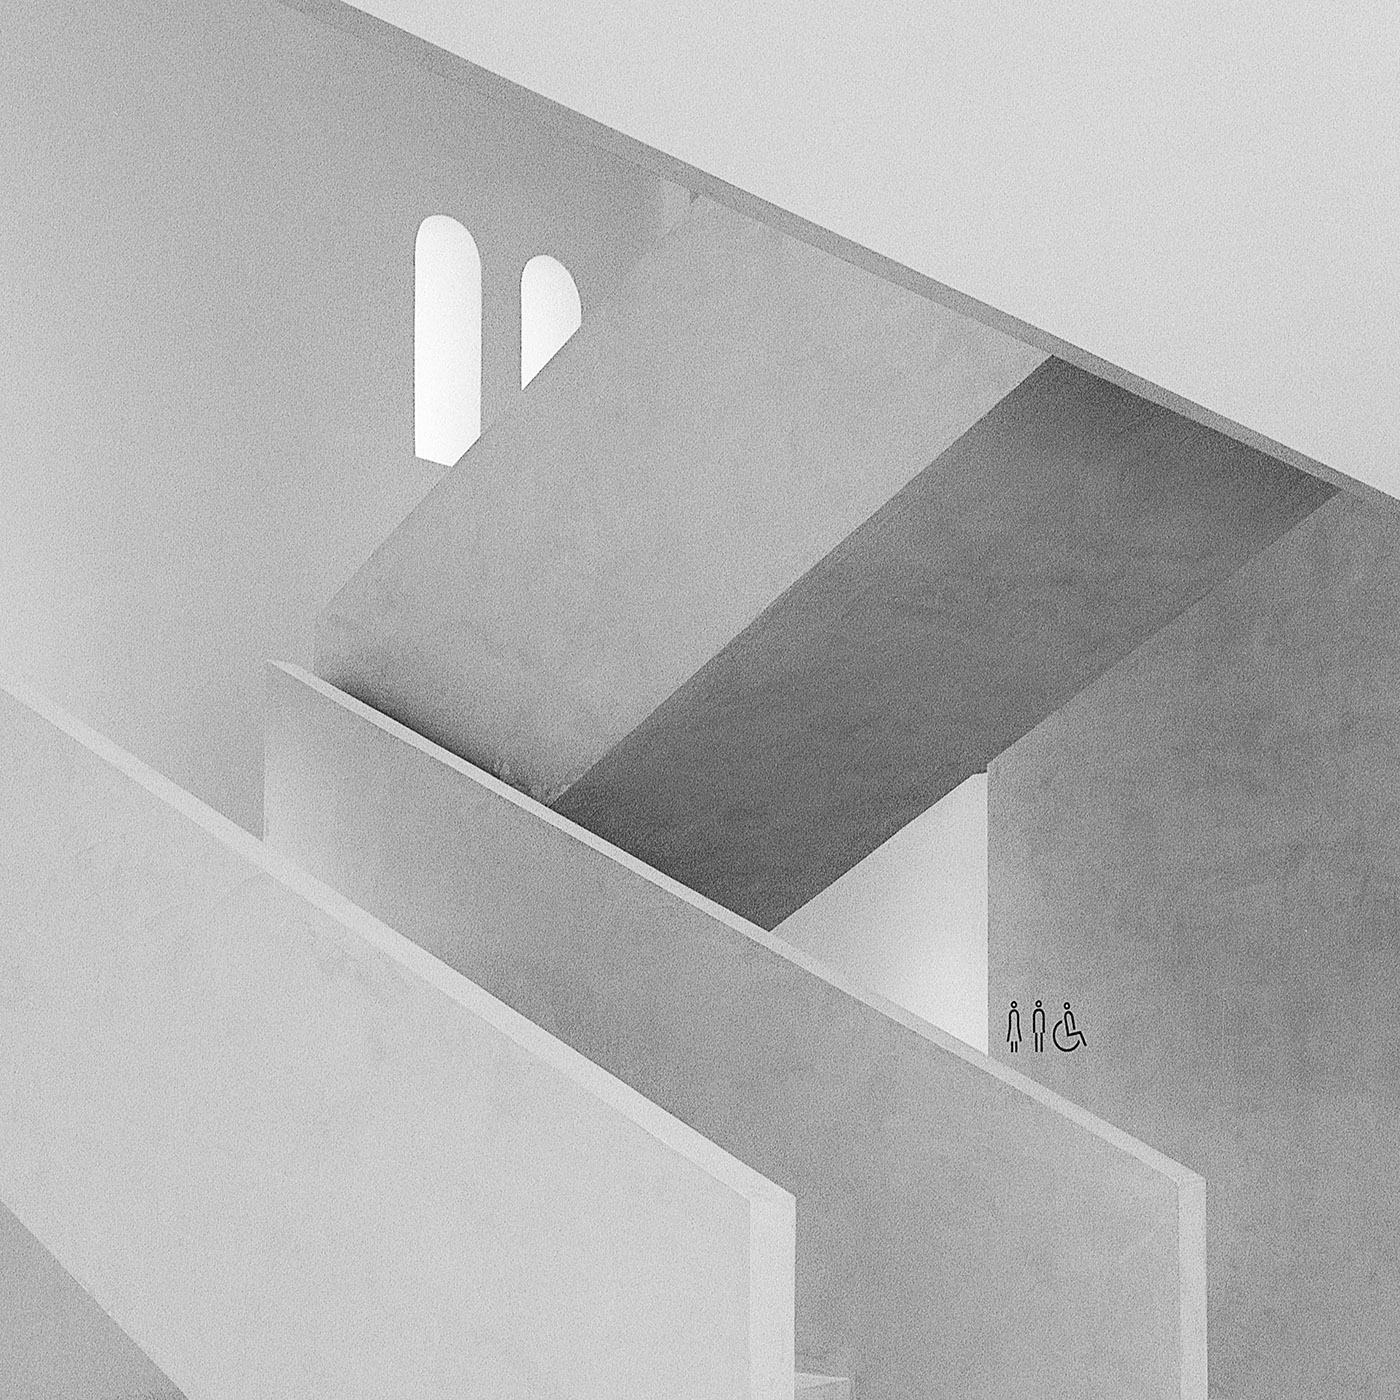 In second place, a former slaughter house is refurbished: “Minimalist Concrete Staircase”